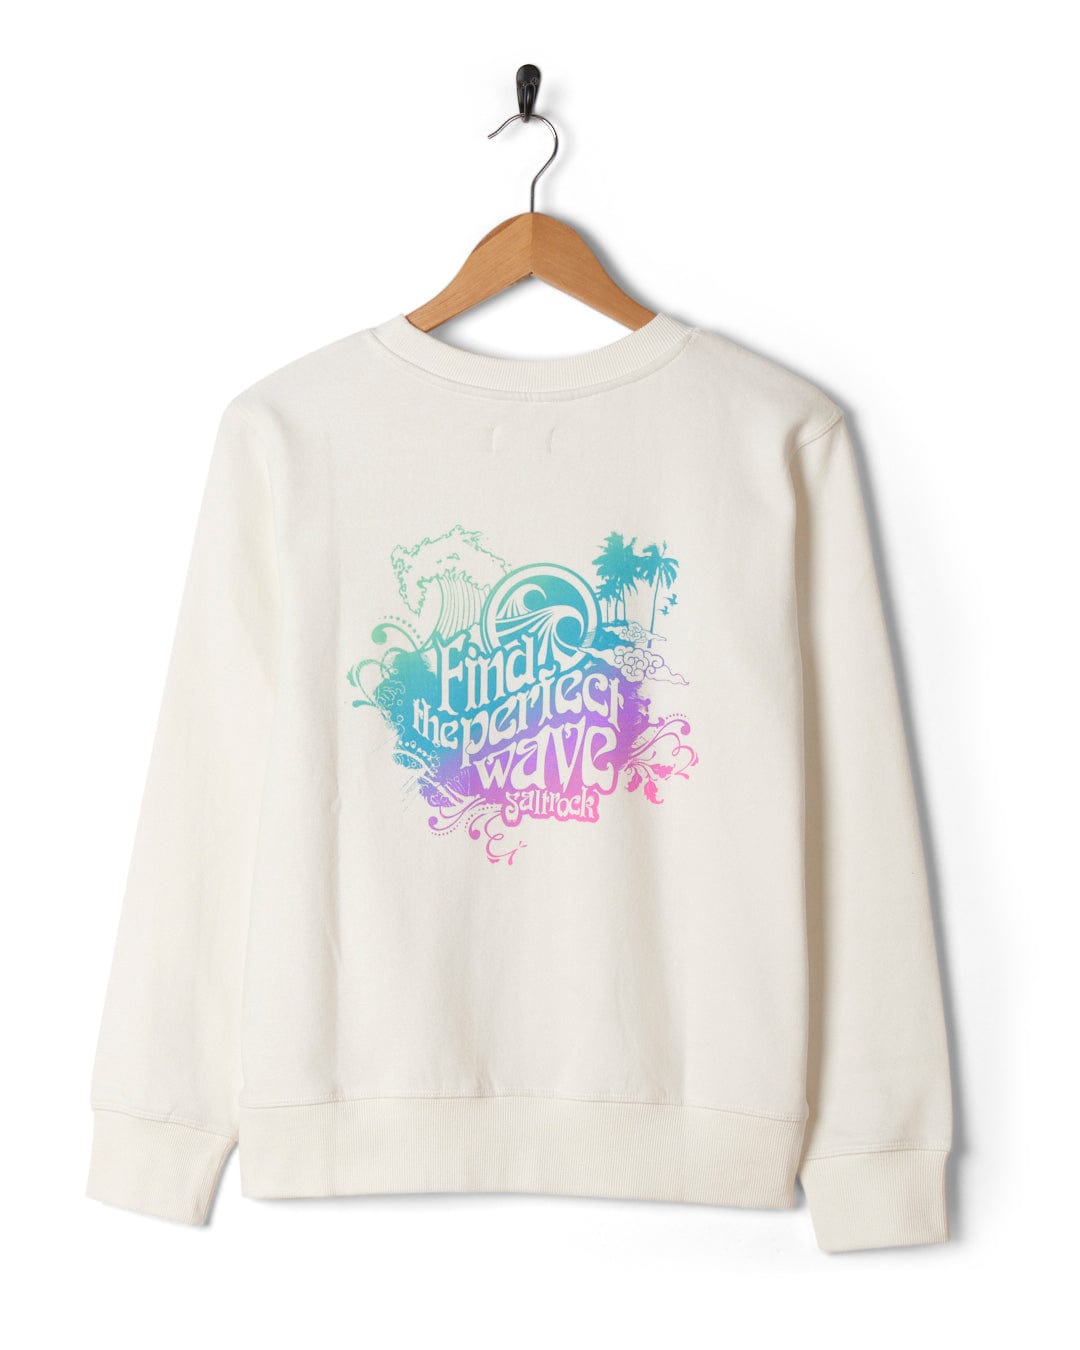 A Saltrock white sweatshirt with a "Perfect Wave" multi-colored slogan on it.